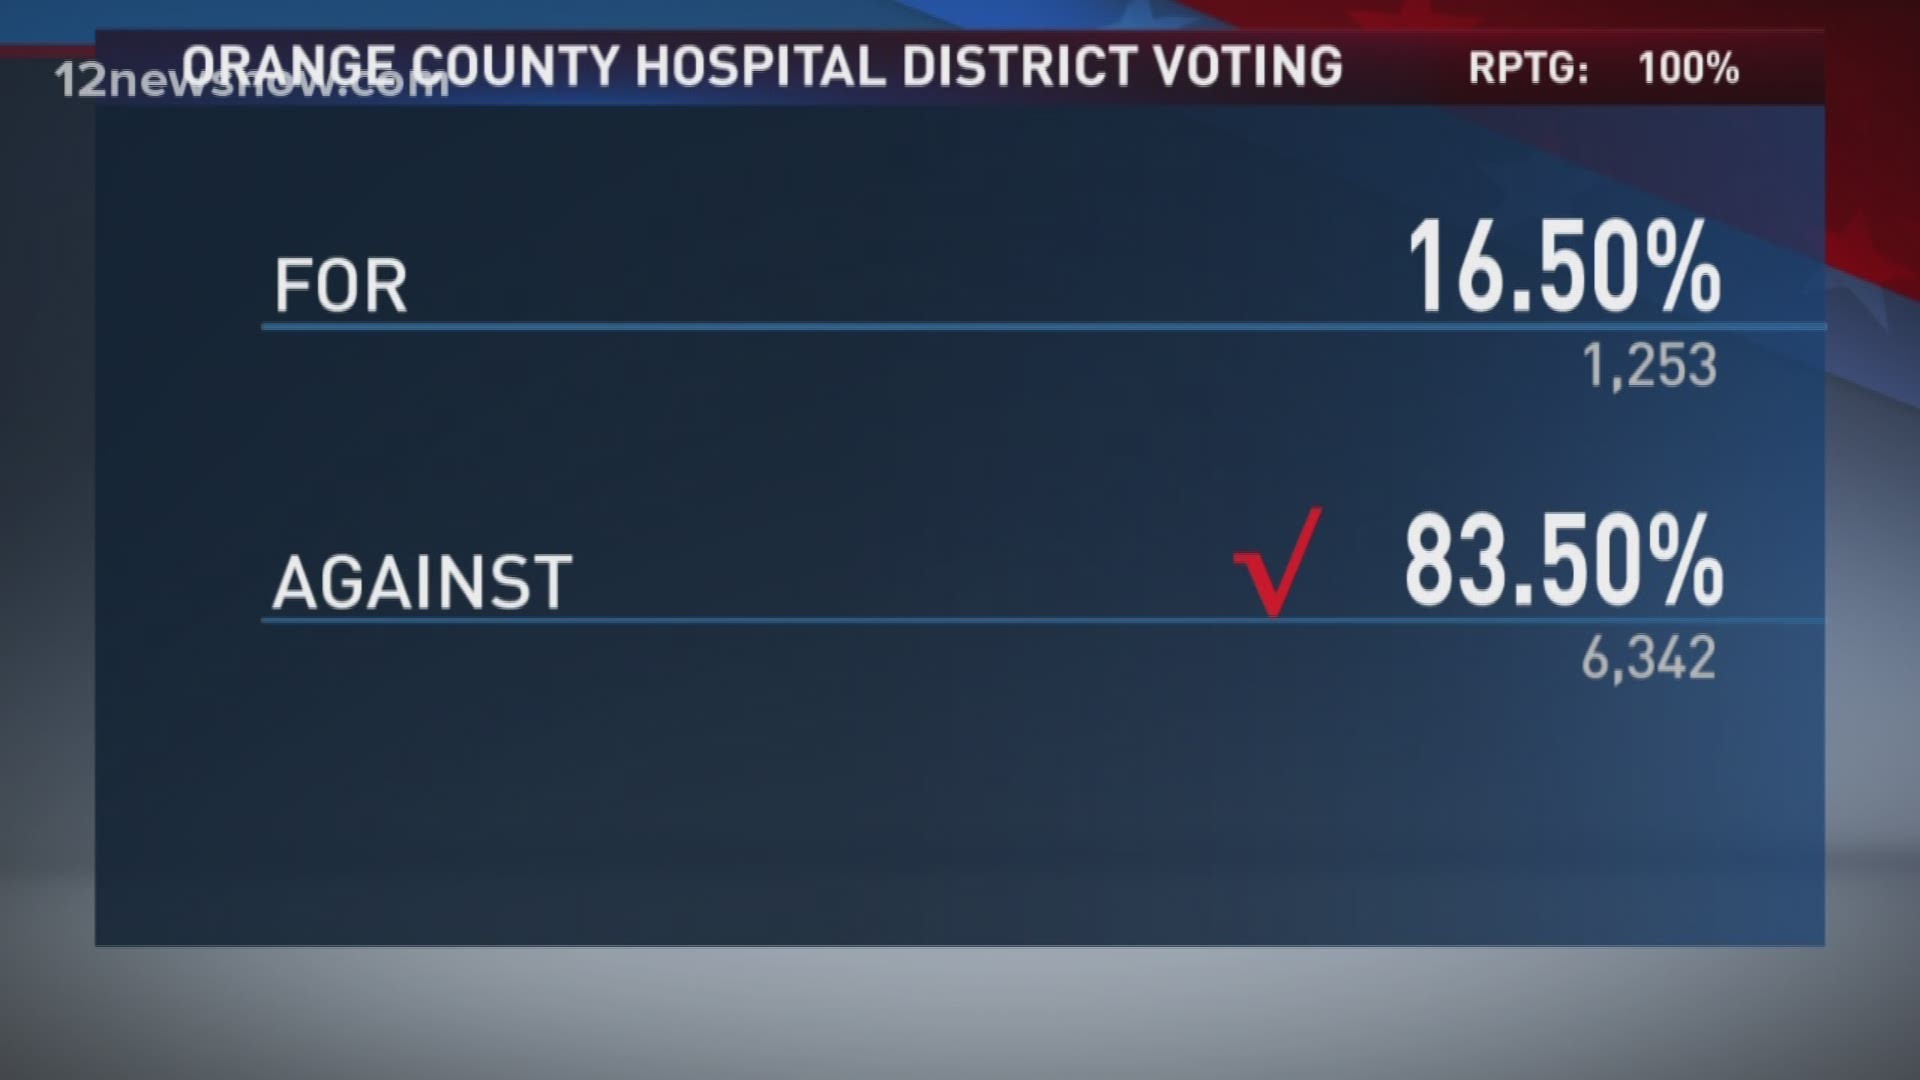 The voters of Orange County have rejected a proposed hospital district. Over 5,000 early votes were cast and 7,597 total were cast. 